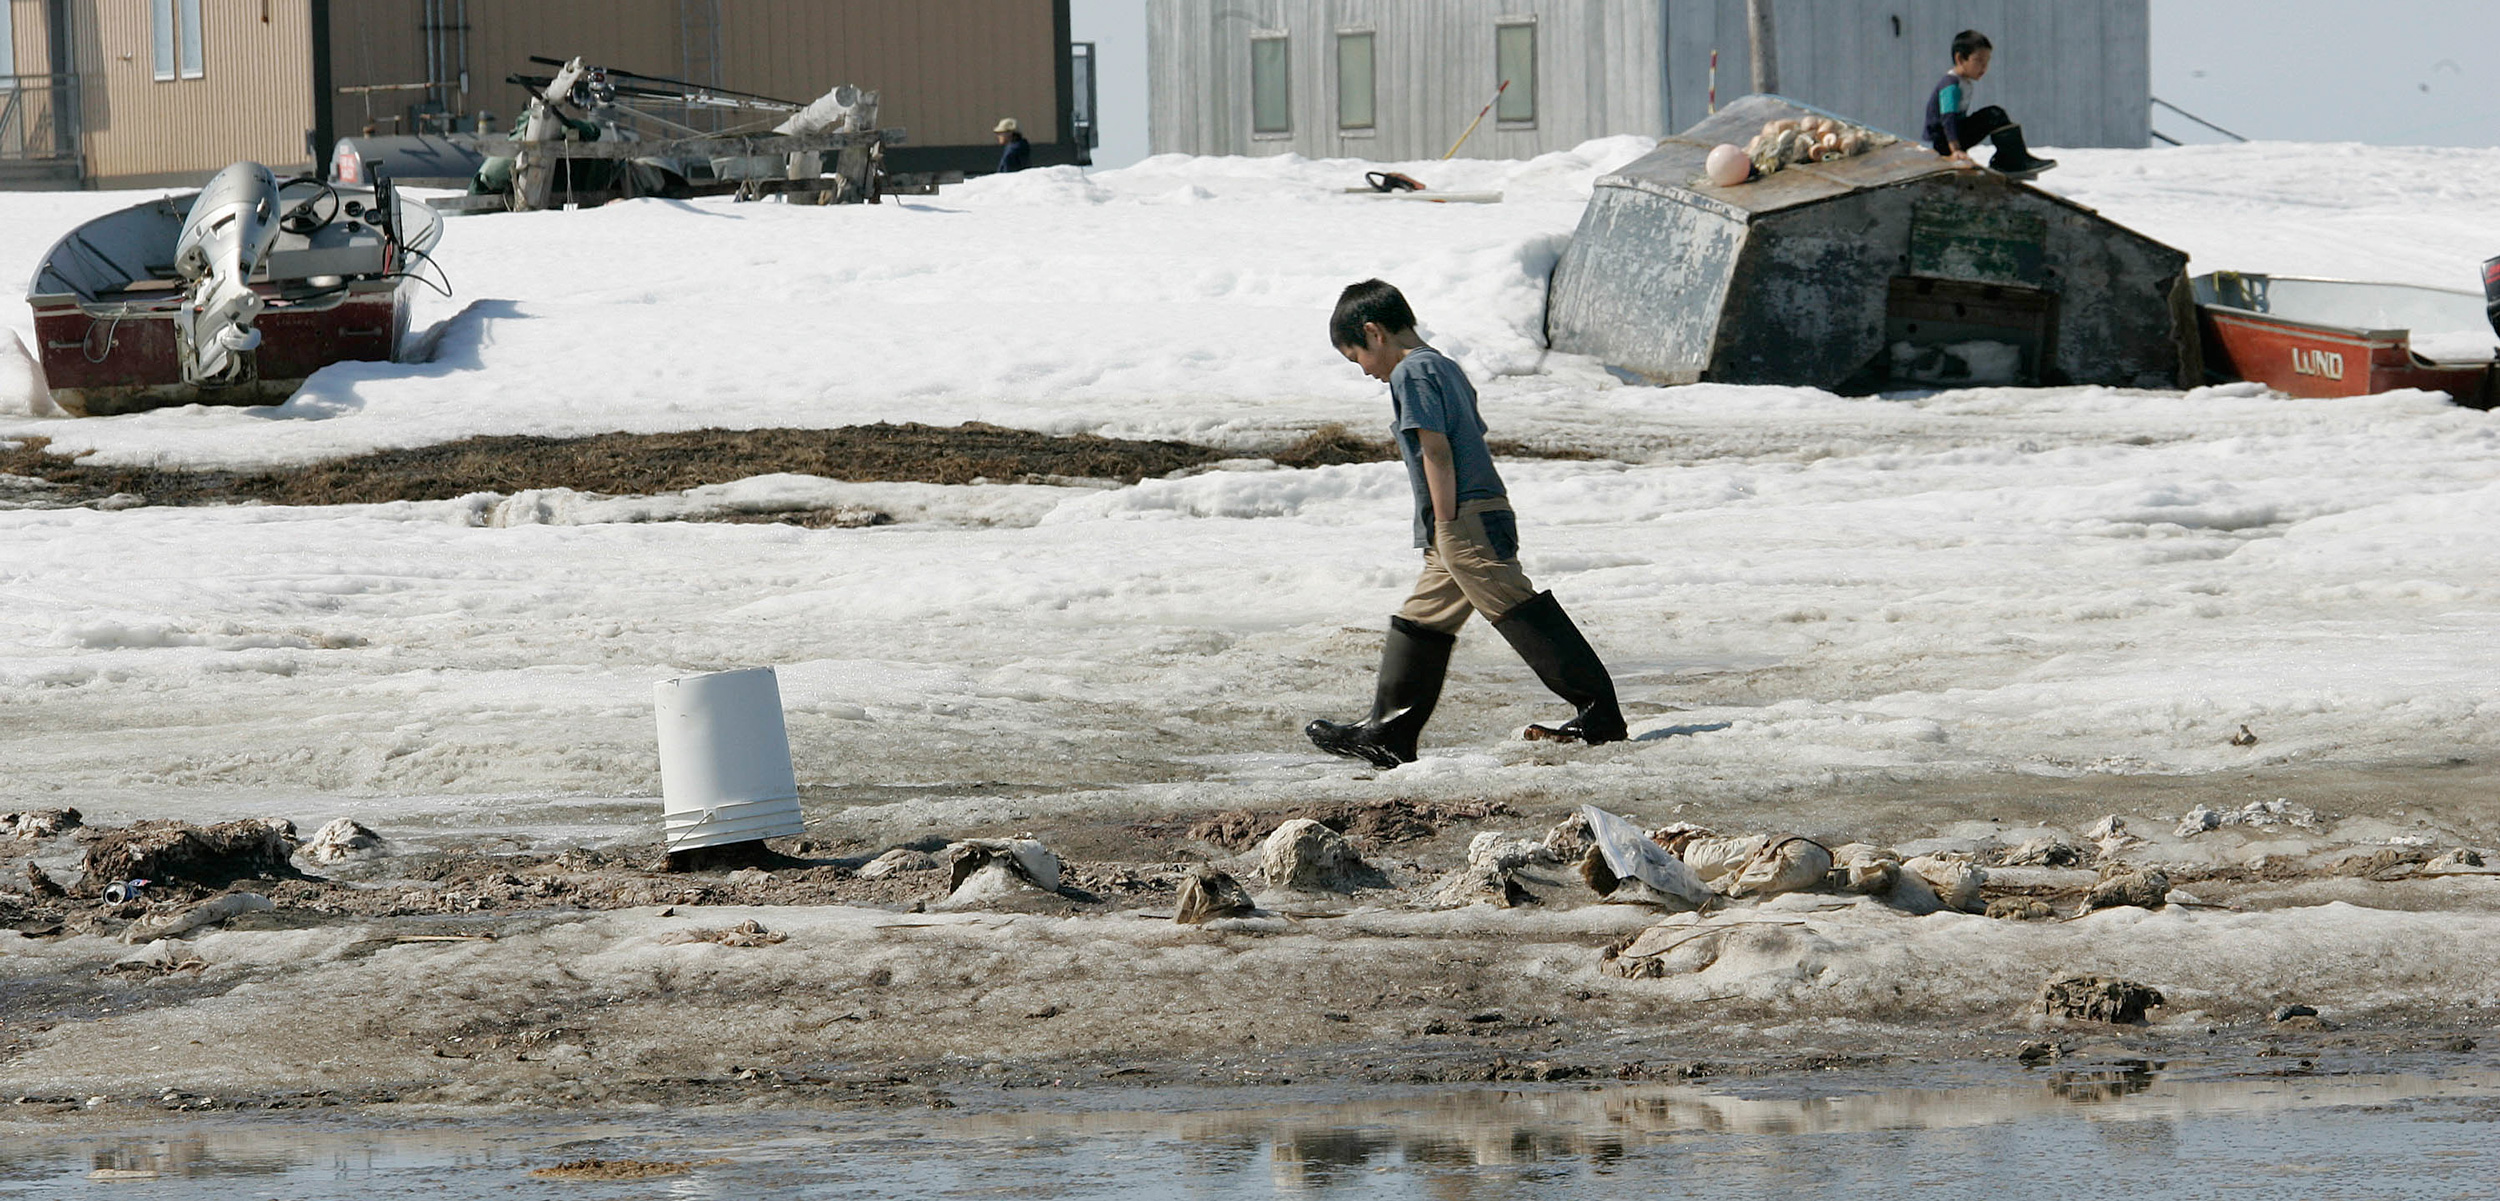 As the land erodes around them, the villagers of Newtok, Alaska, struggle to relocate their community. Photo by Al Grillo/AP Images